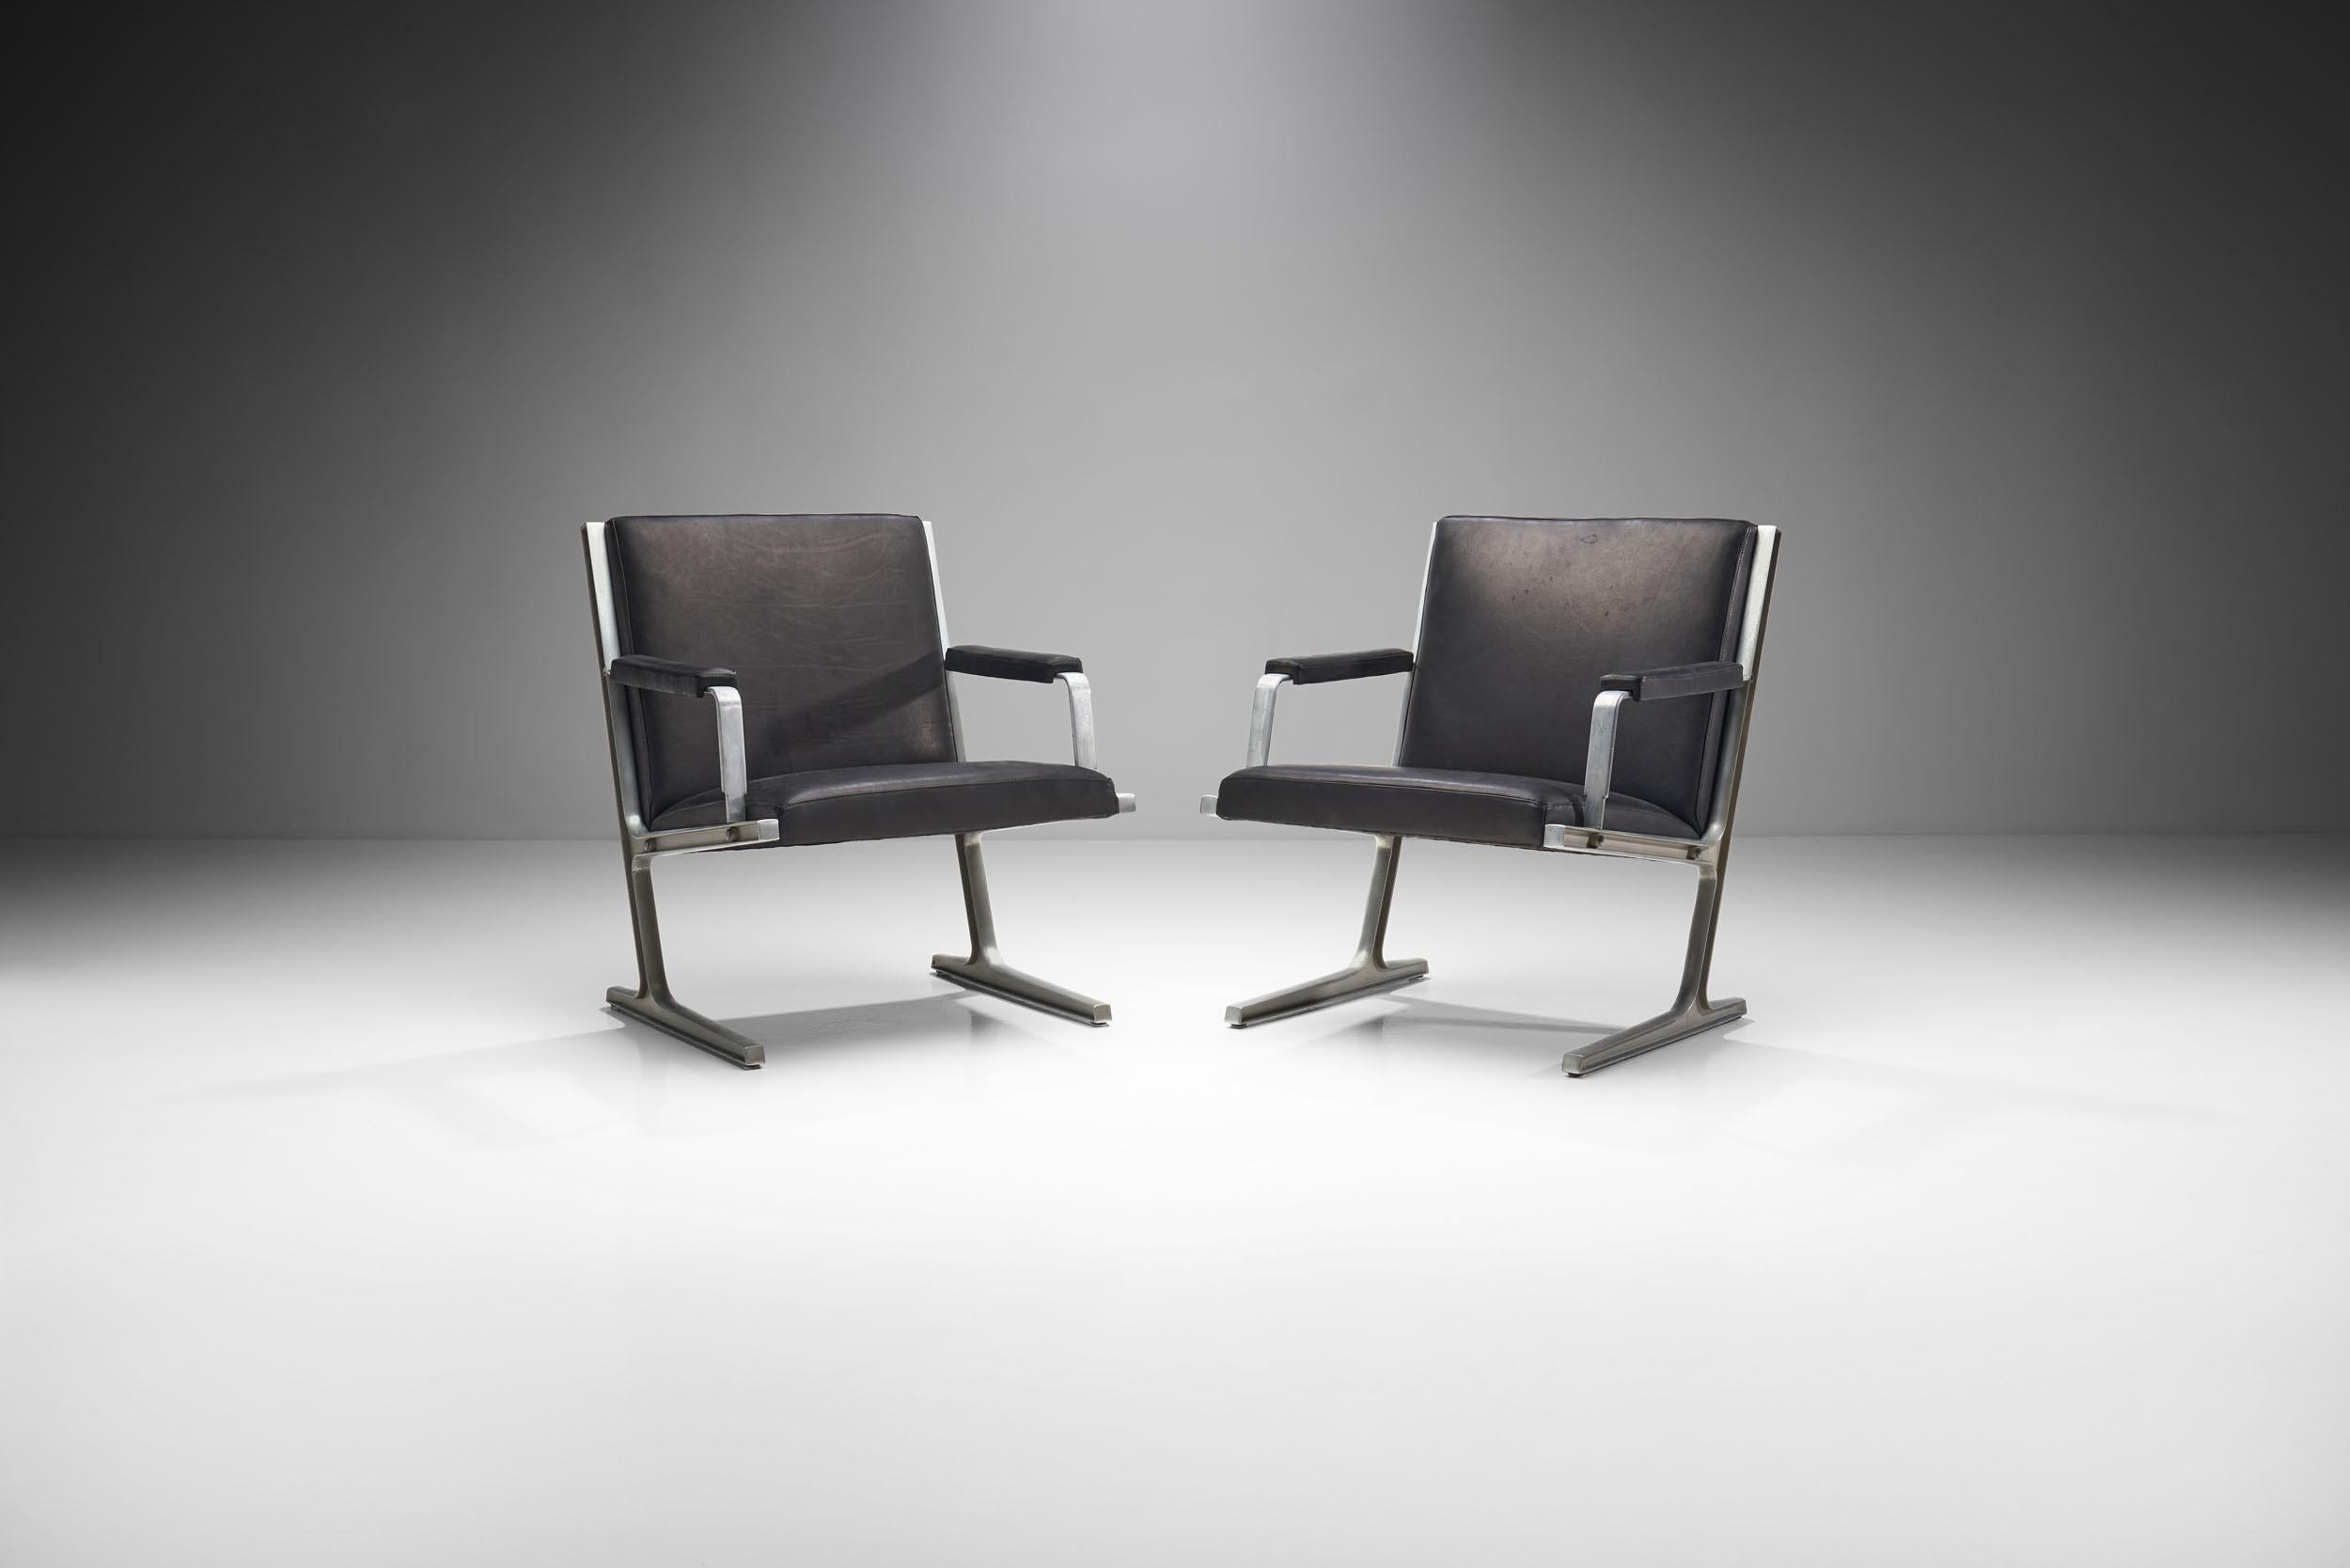 Danish Pair of “Lufthavns Stole” Chairs by Ditte Heath and Adrian Heath, Denmark, 1969 For Sale